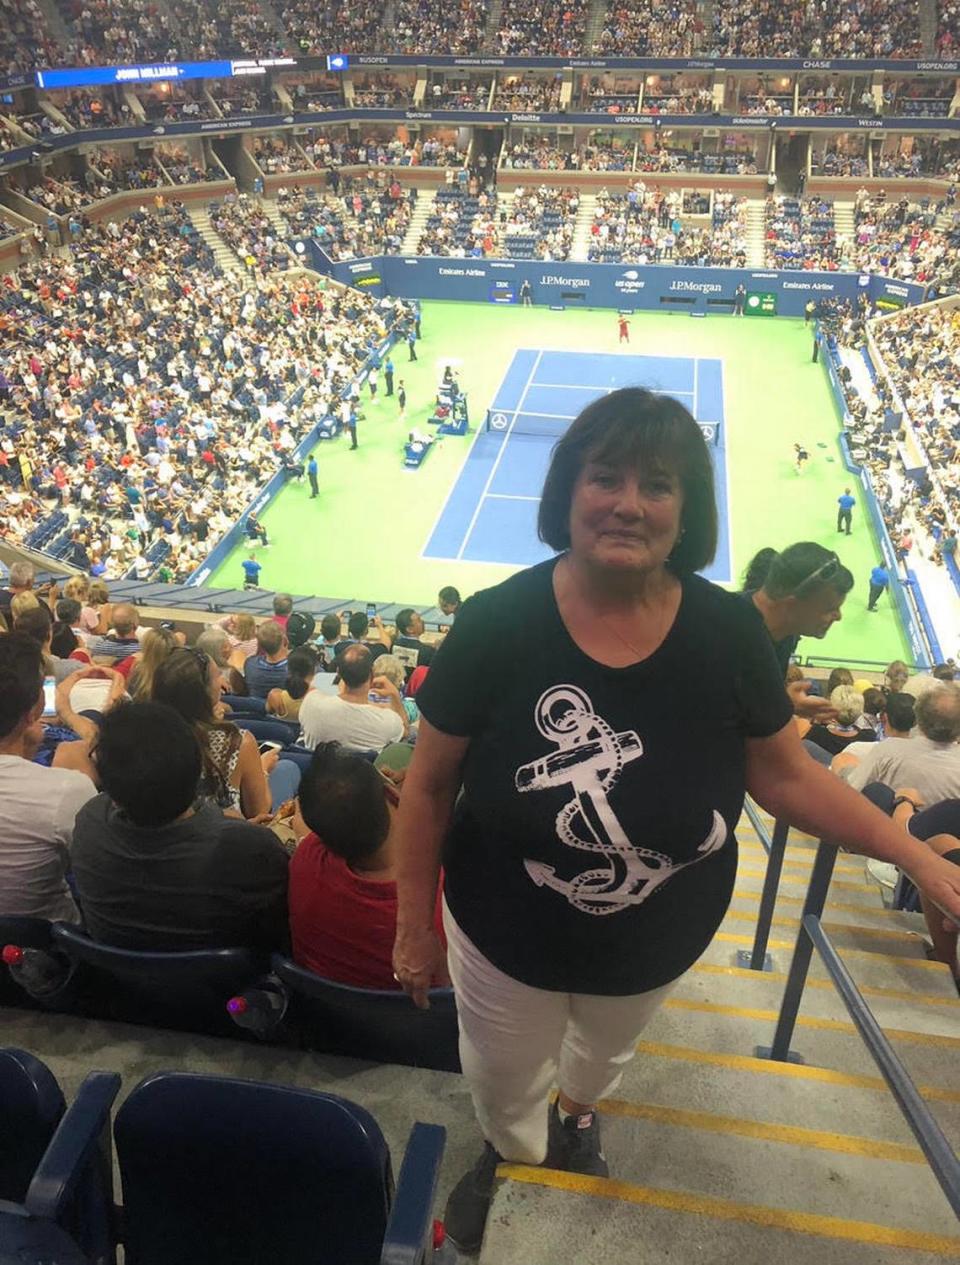 Manon Eilts of the USTA Missouri Valley Section attends a recent U.S. Open tennis tournament in New York.